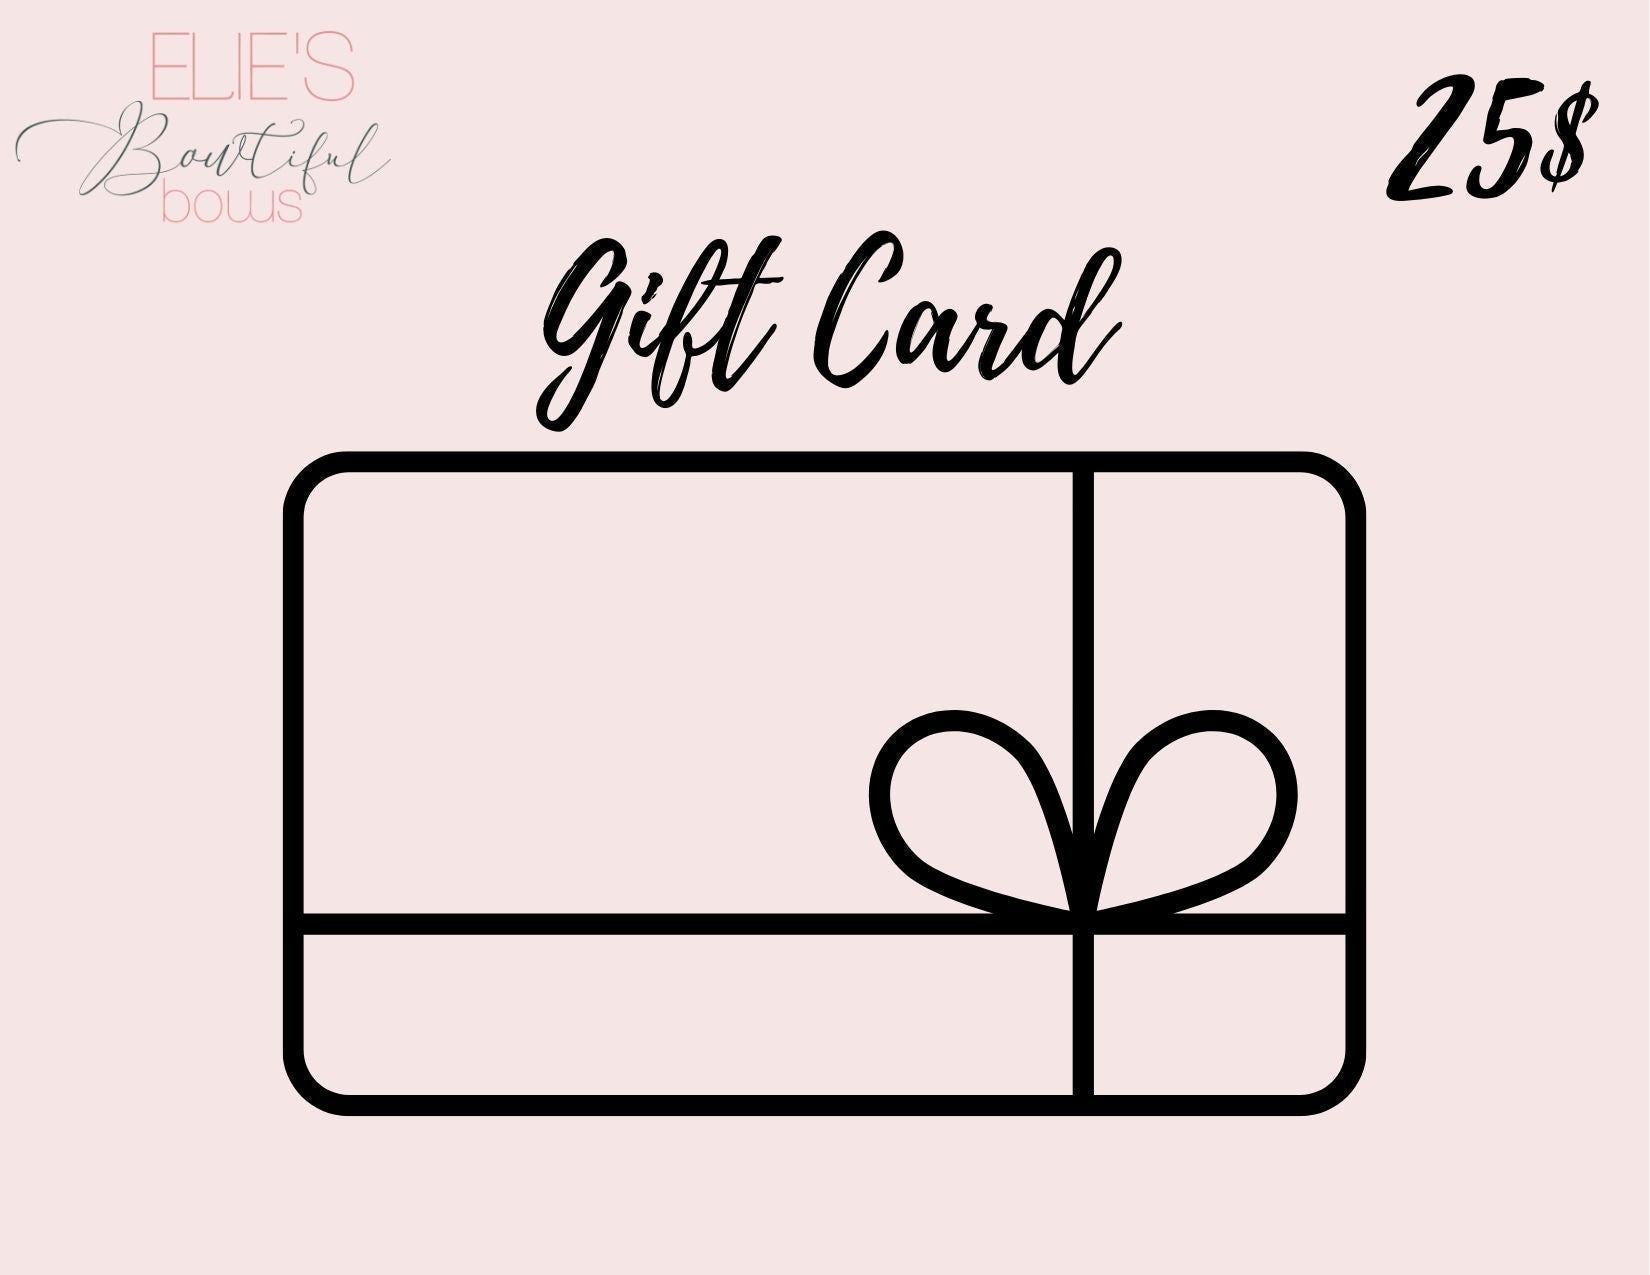 Gift Card-Gift Cards-Elie’s Bows